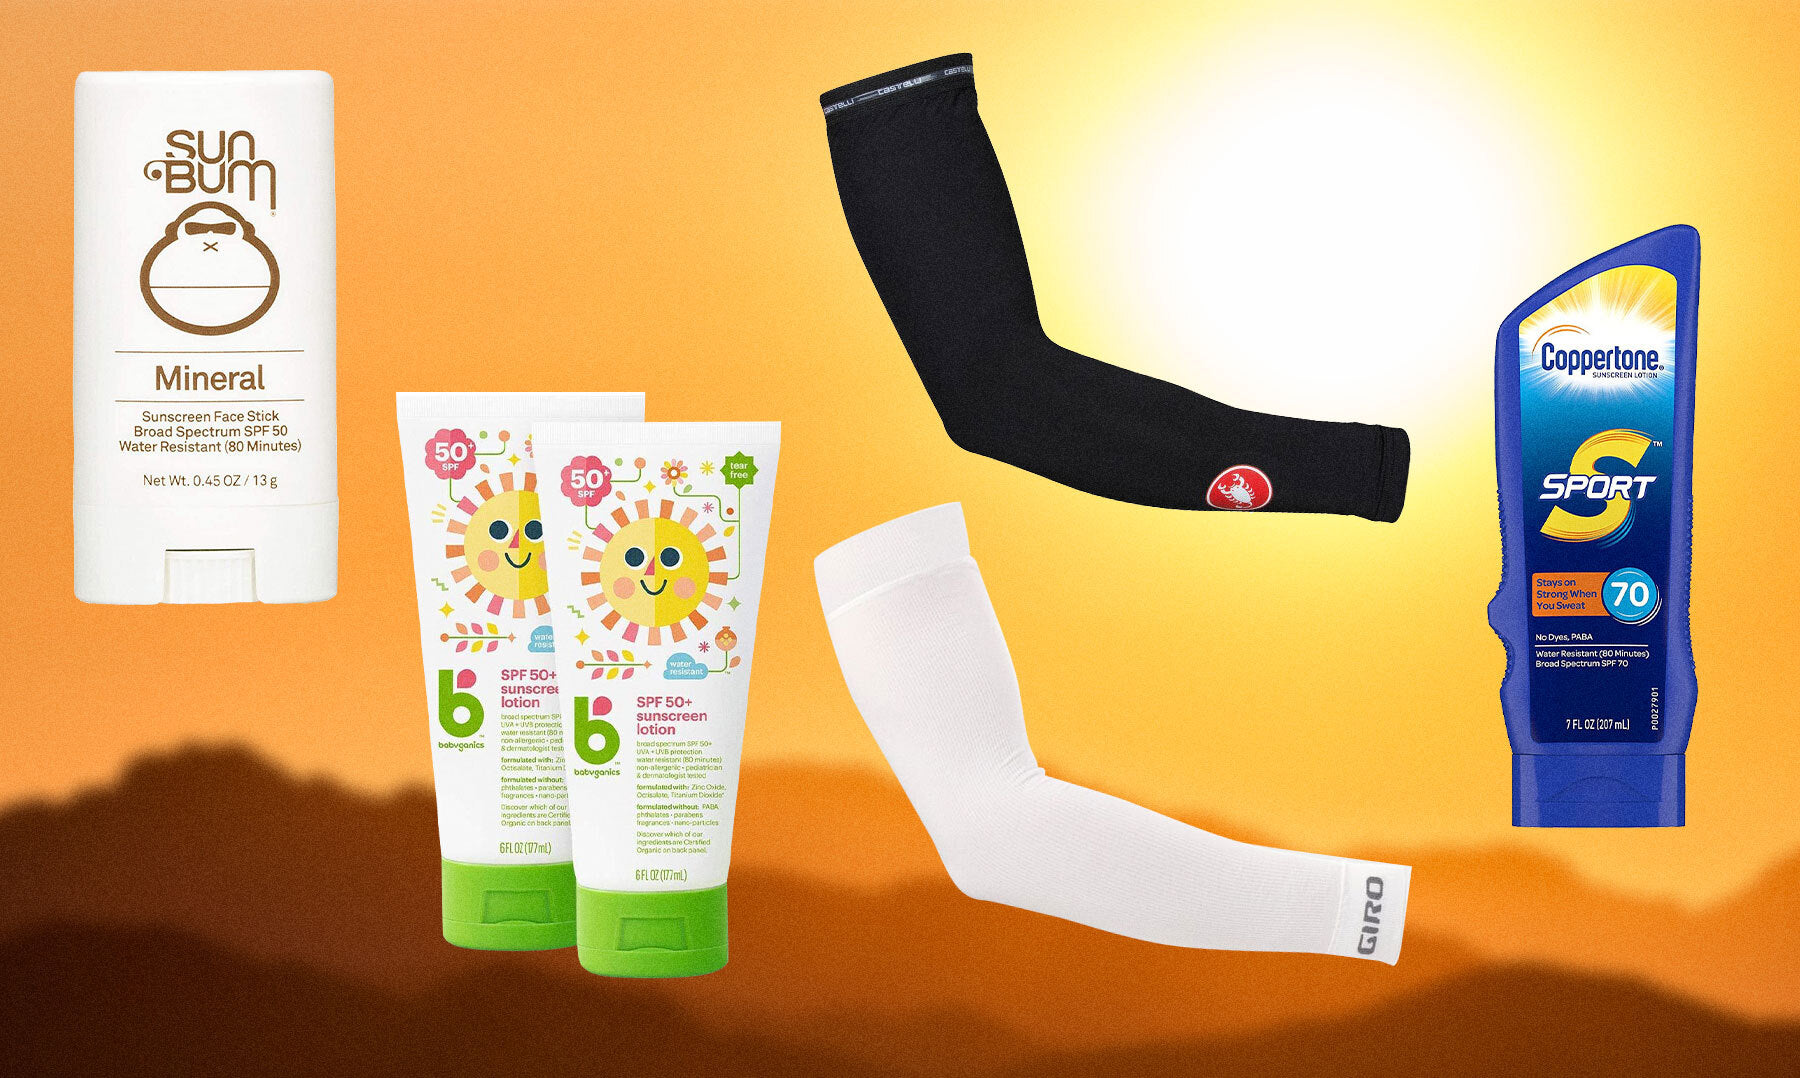 The best cycling sunscreen and sun sleeves